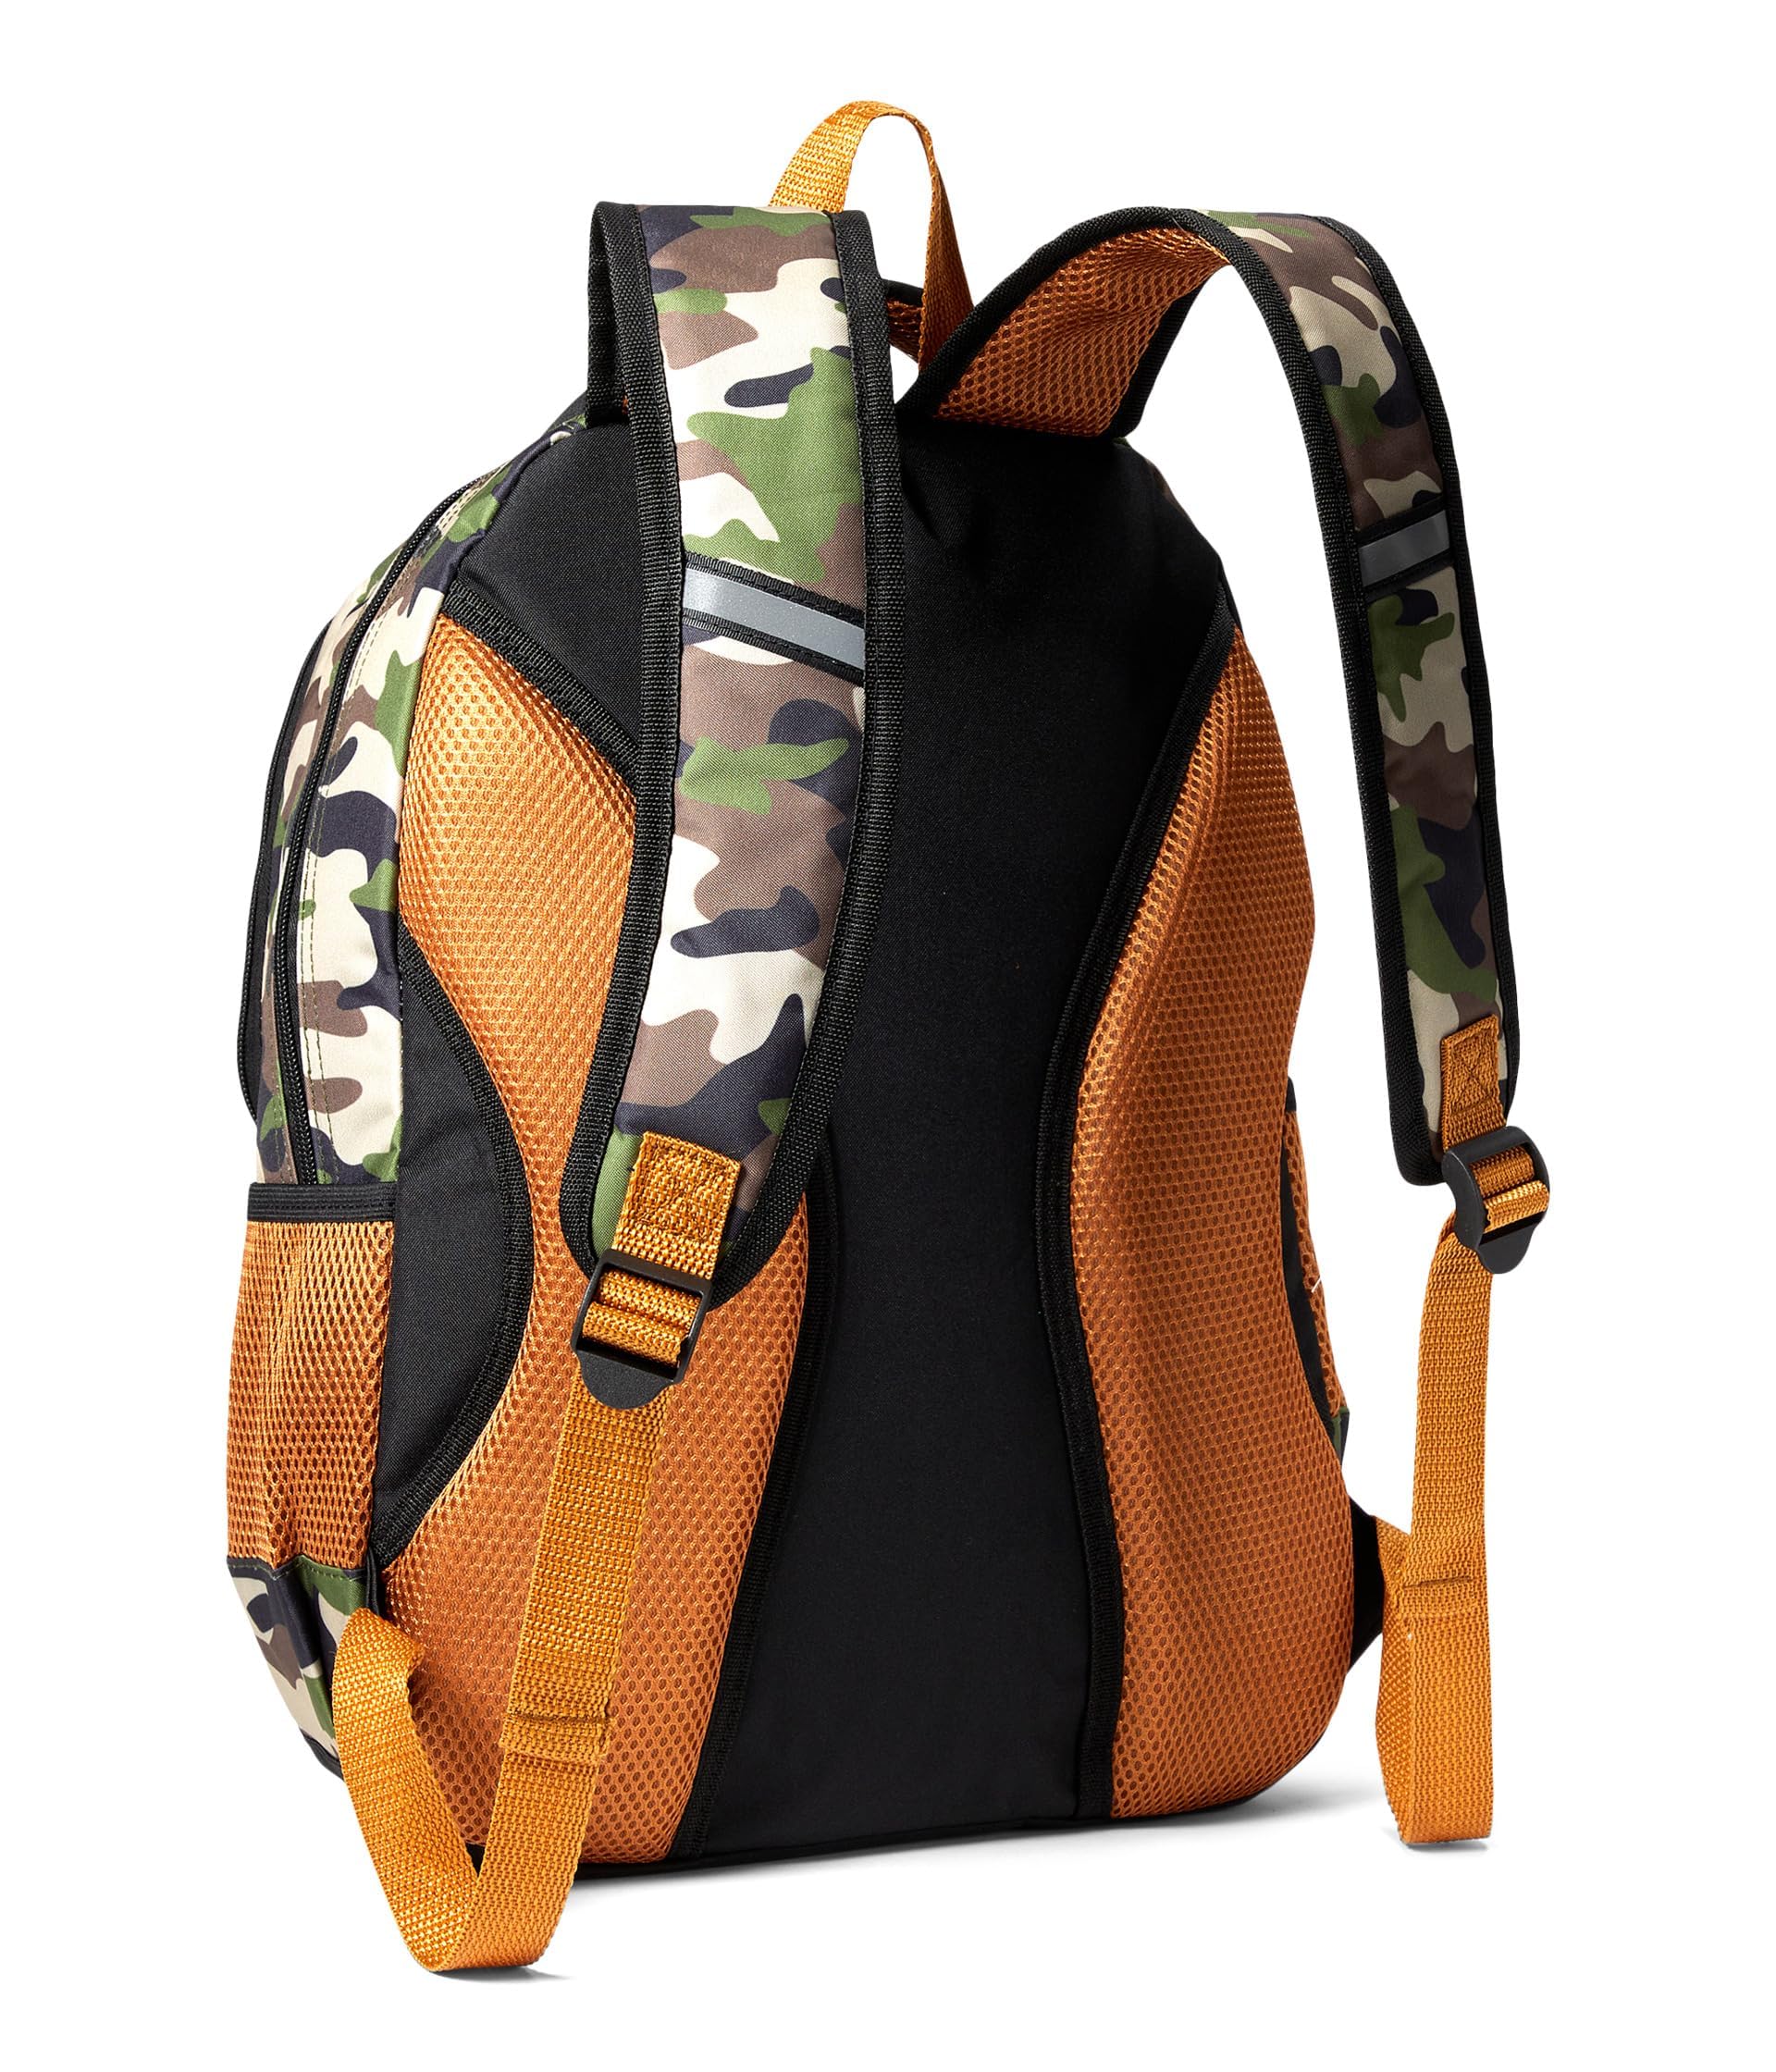 Western Chief Multi Compartment Backpack Bundle w/Lunch Box & Pencil Pouch Camo One Size